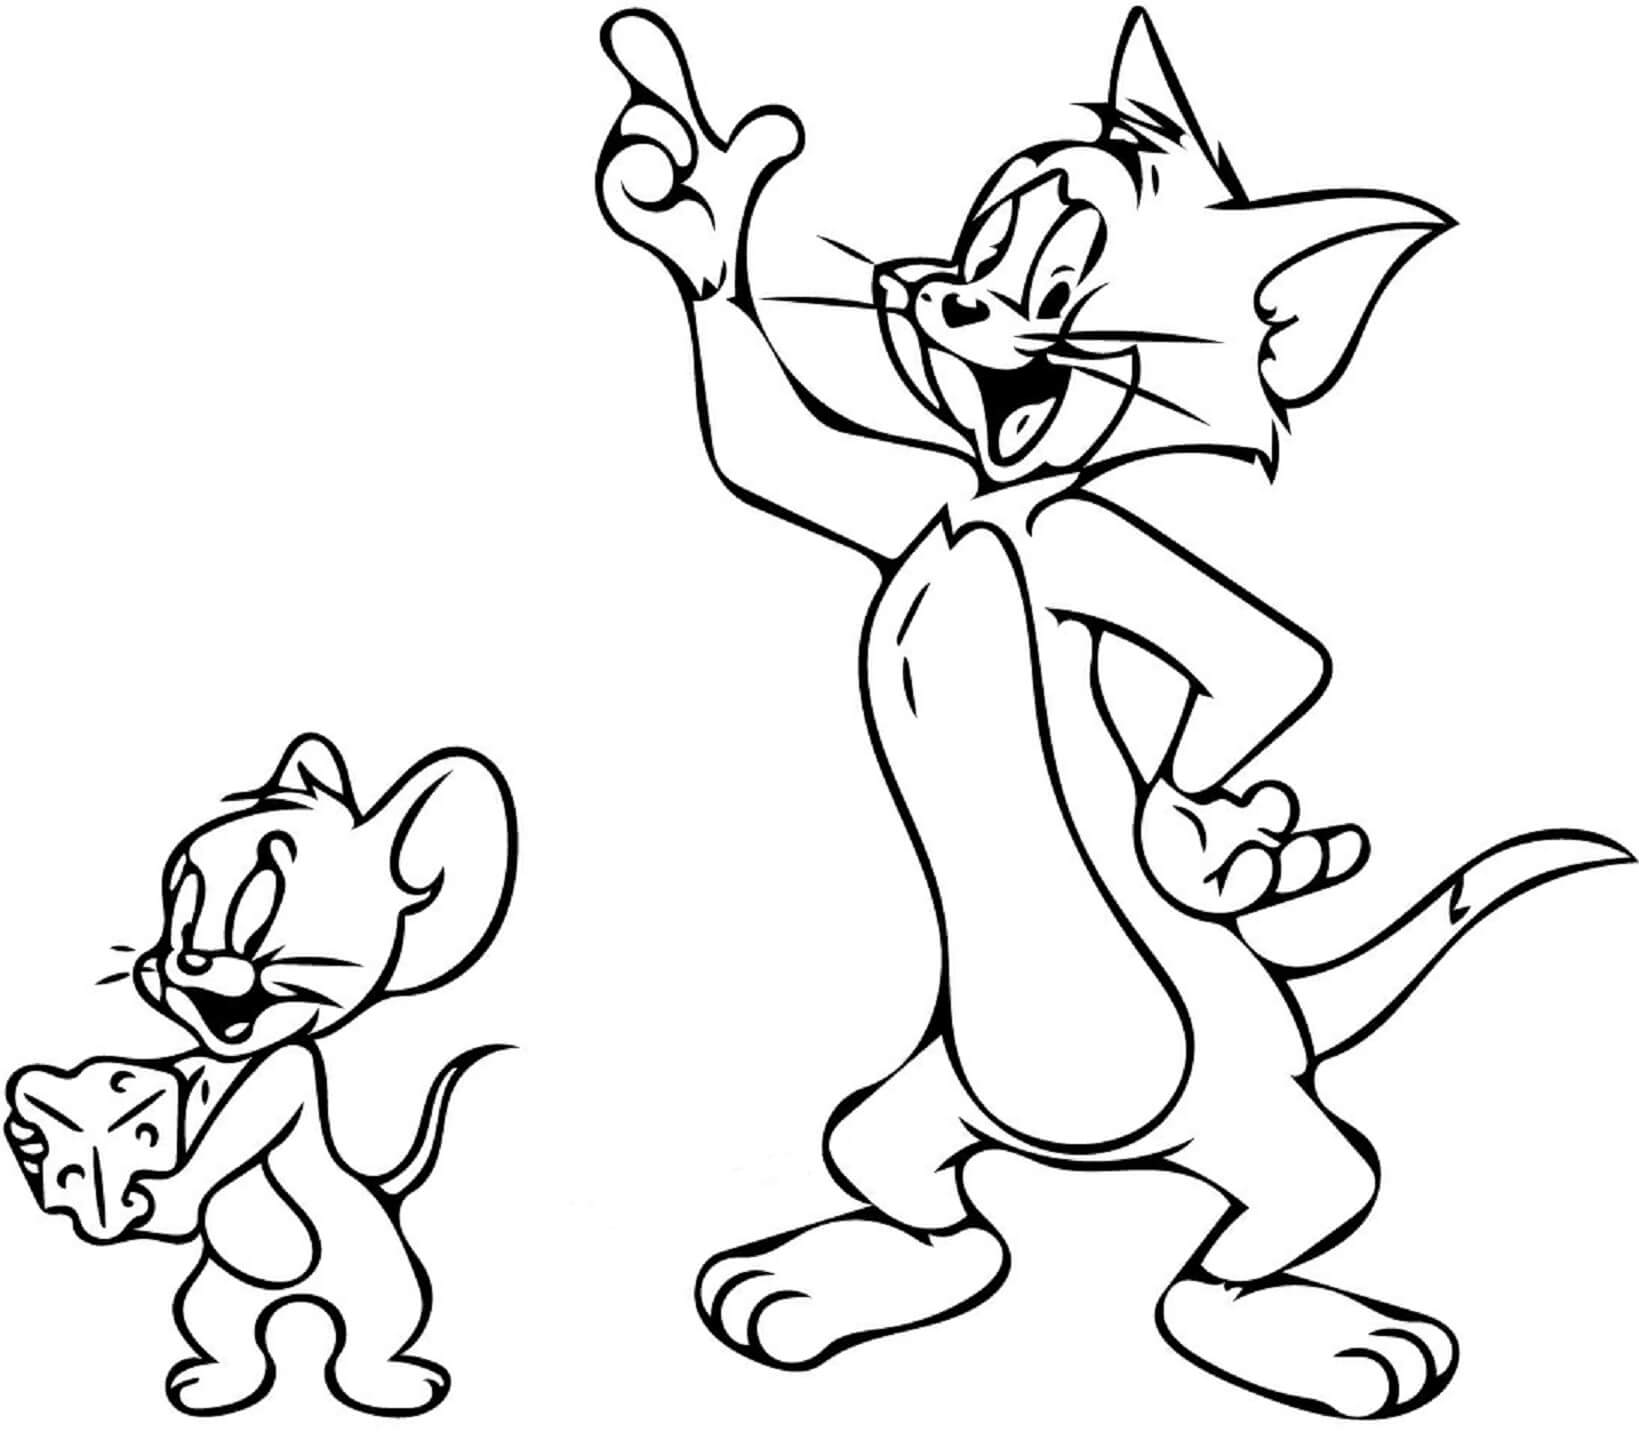 Tom & Jerry Drawing Tutorial - How to draw Tom & Jerry step by step